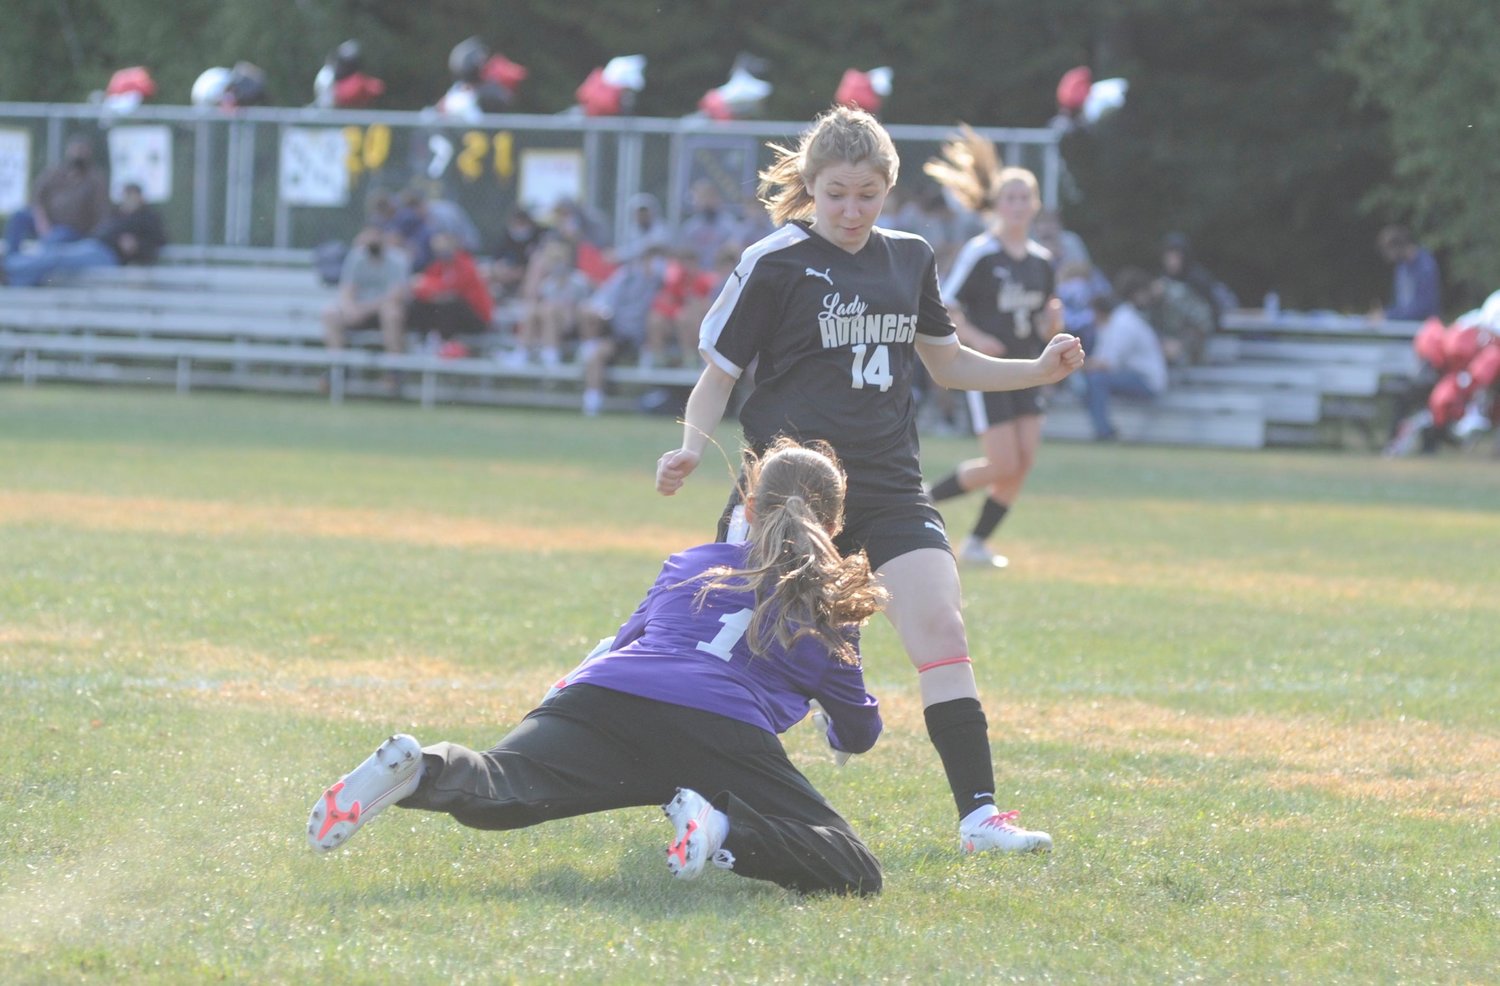 A diving save. Scranton’s keeper Lanee Olson makes a diving save of a shot on goal by Honesdale’s Anna Coar late in the match.